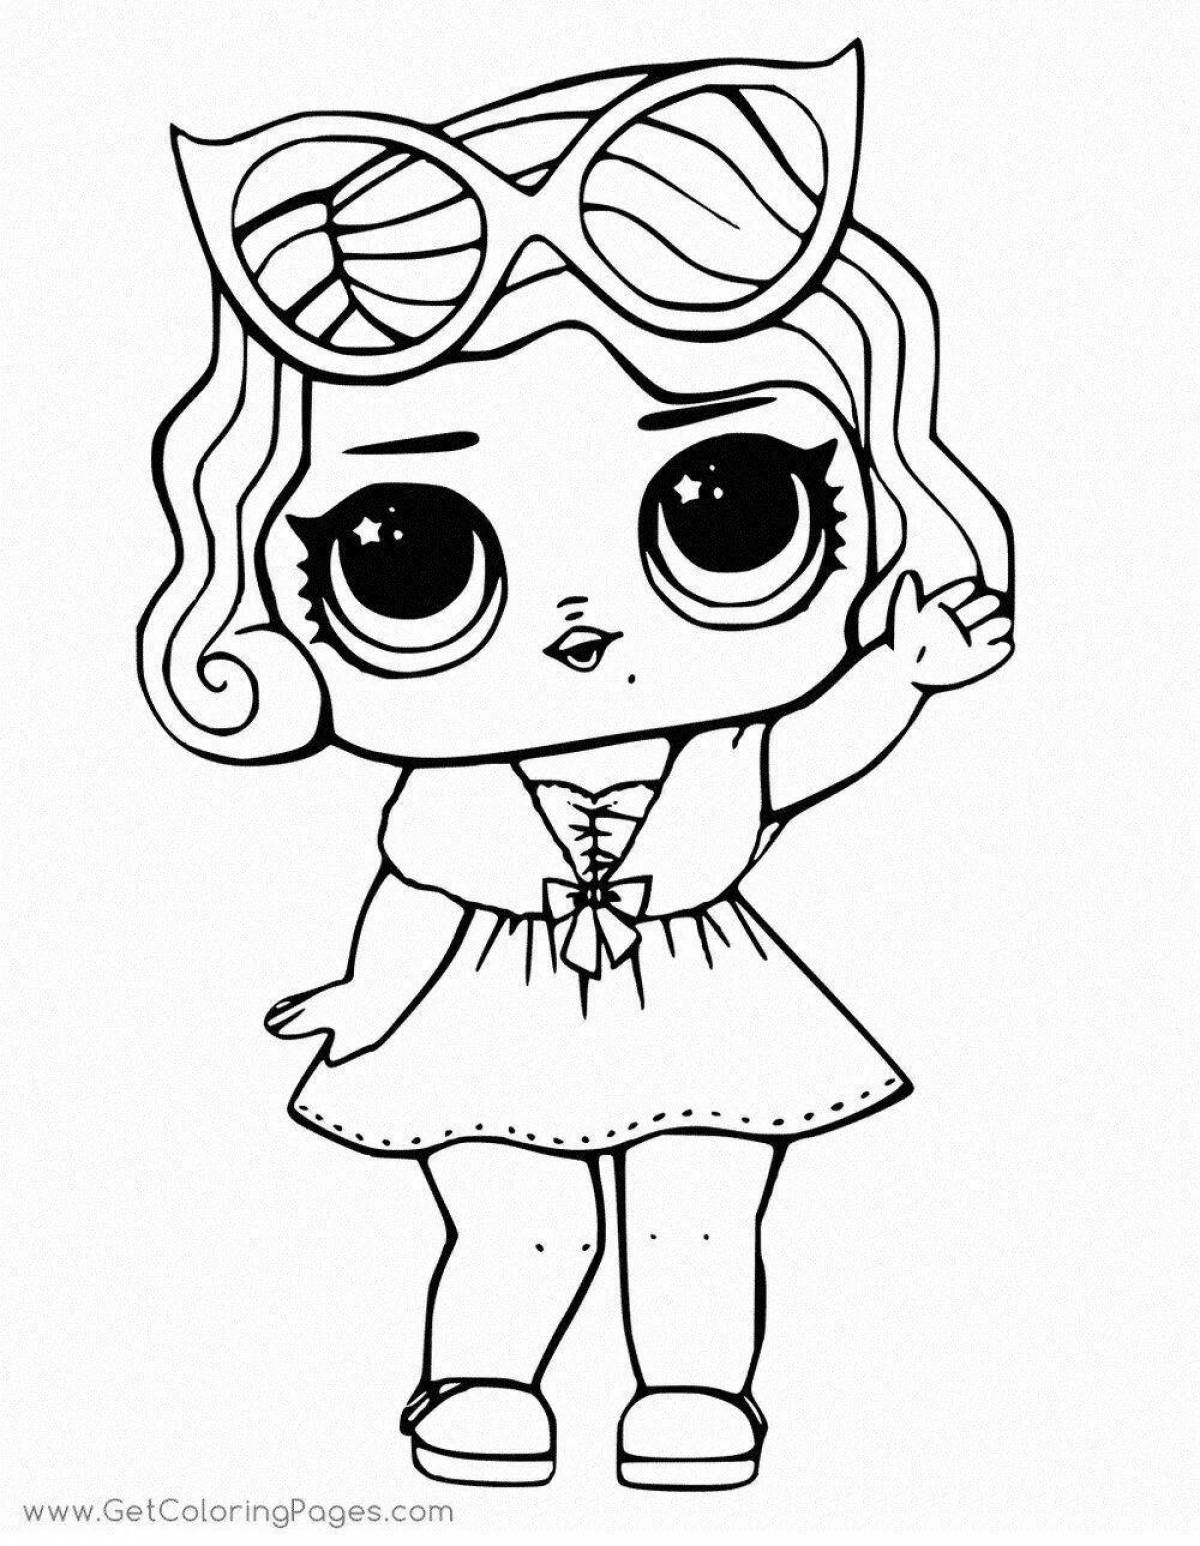 Fabulous coloring page doll lol figure